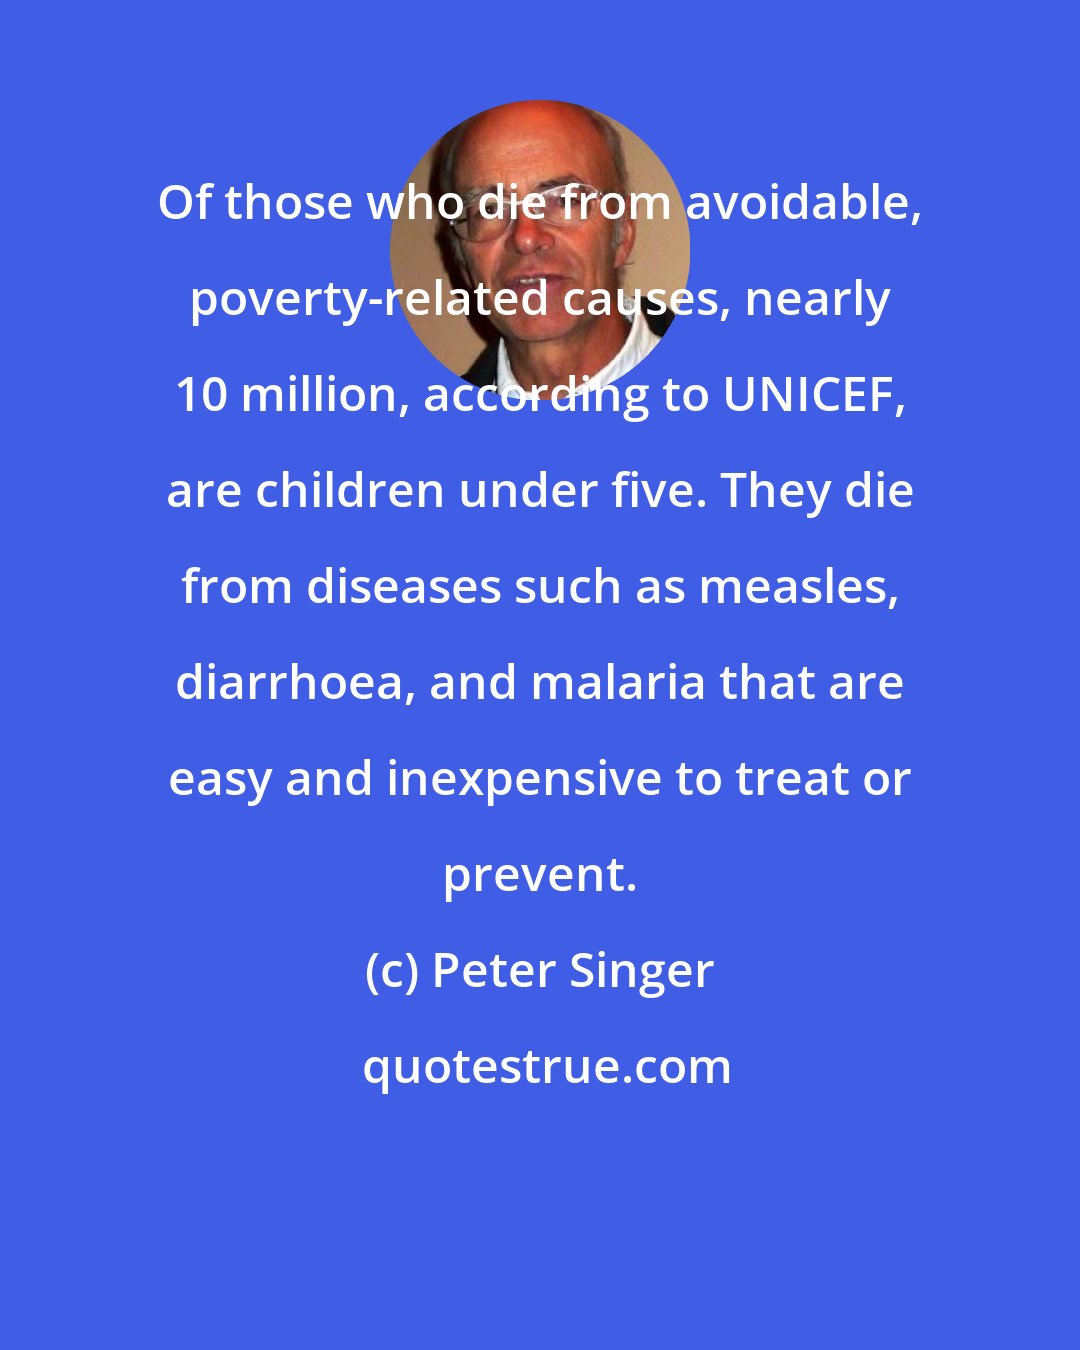 Peter Singer: Of those who die from avoidable, poverty-related causes, nearly 10 million, according to UNICEF, are children under five. They die from diseases such as measles, diarrhoea, and malaria that are easy and inexpensive to treat or prevent.